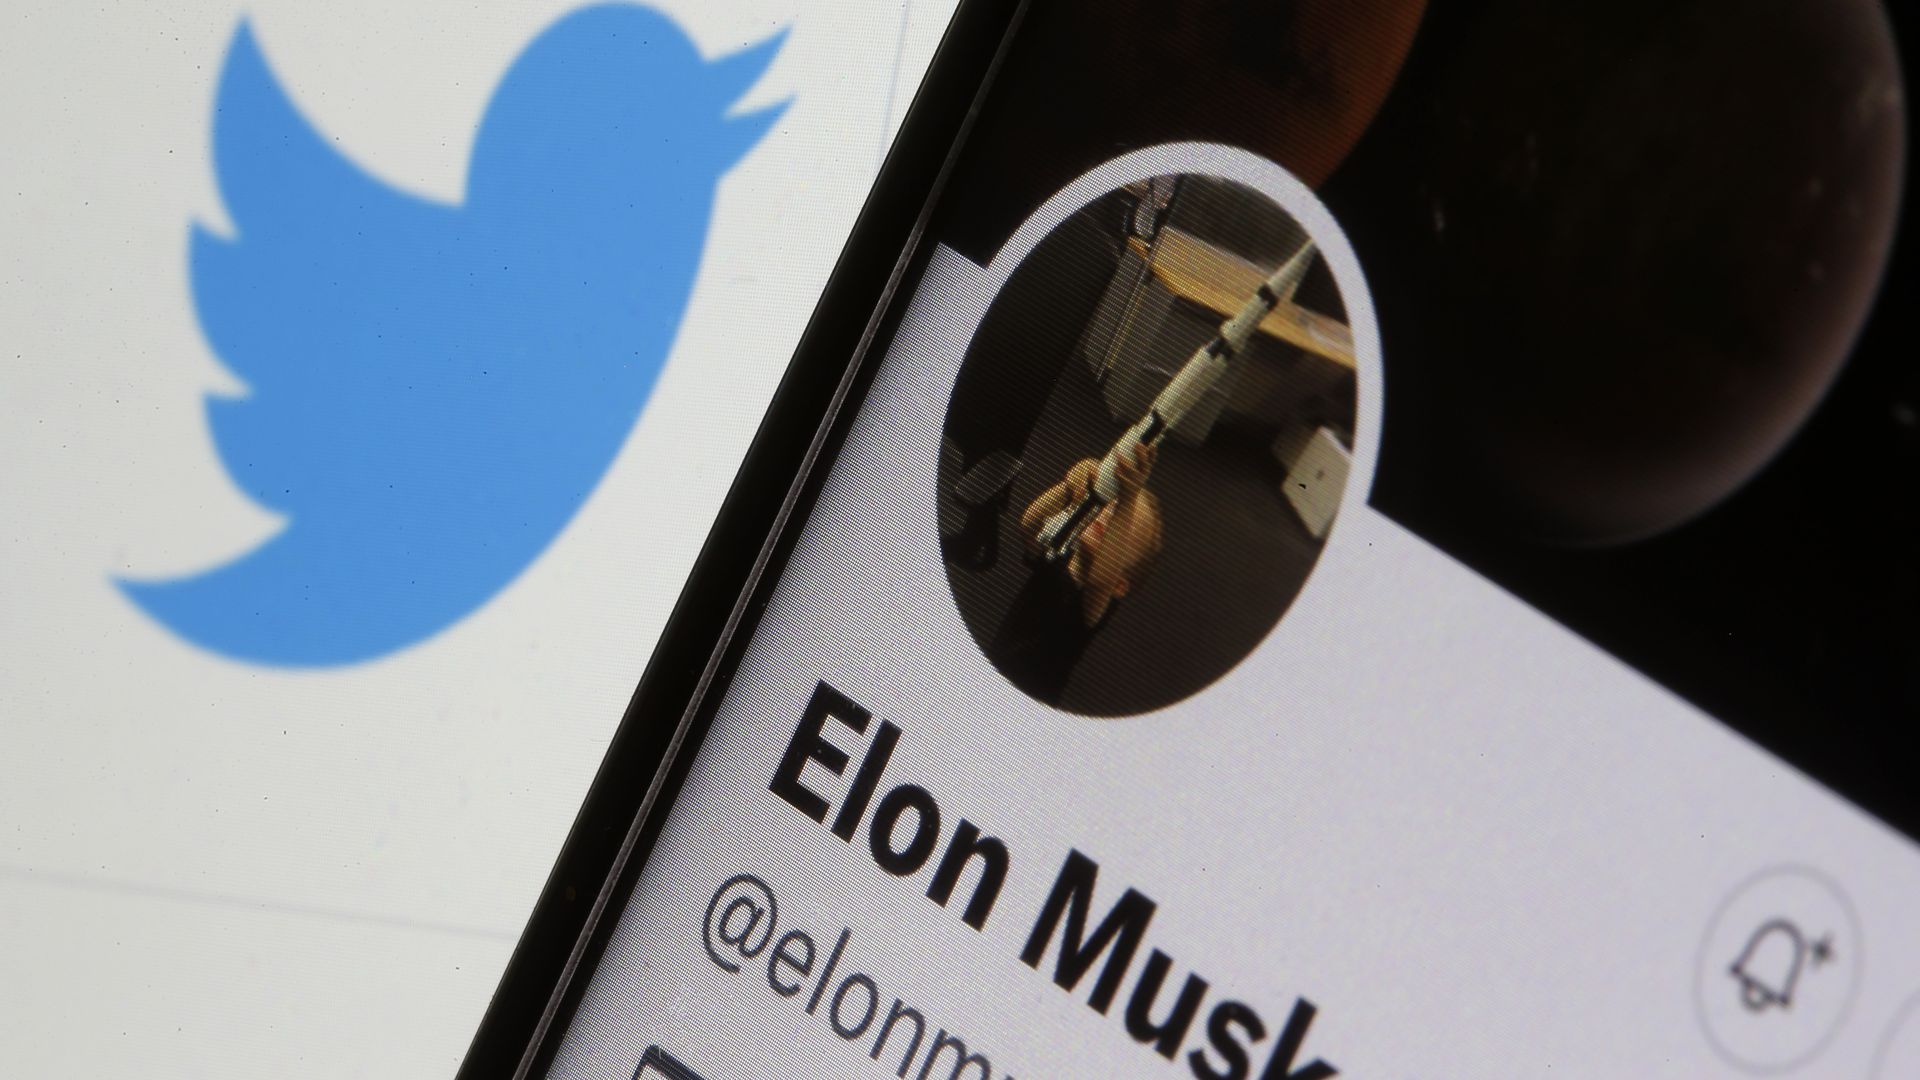 An image of Elon Musk's Twitter page.